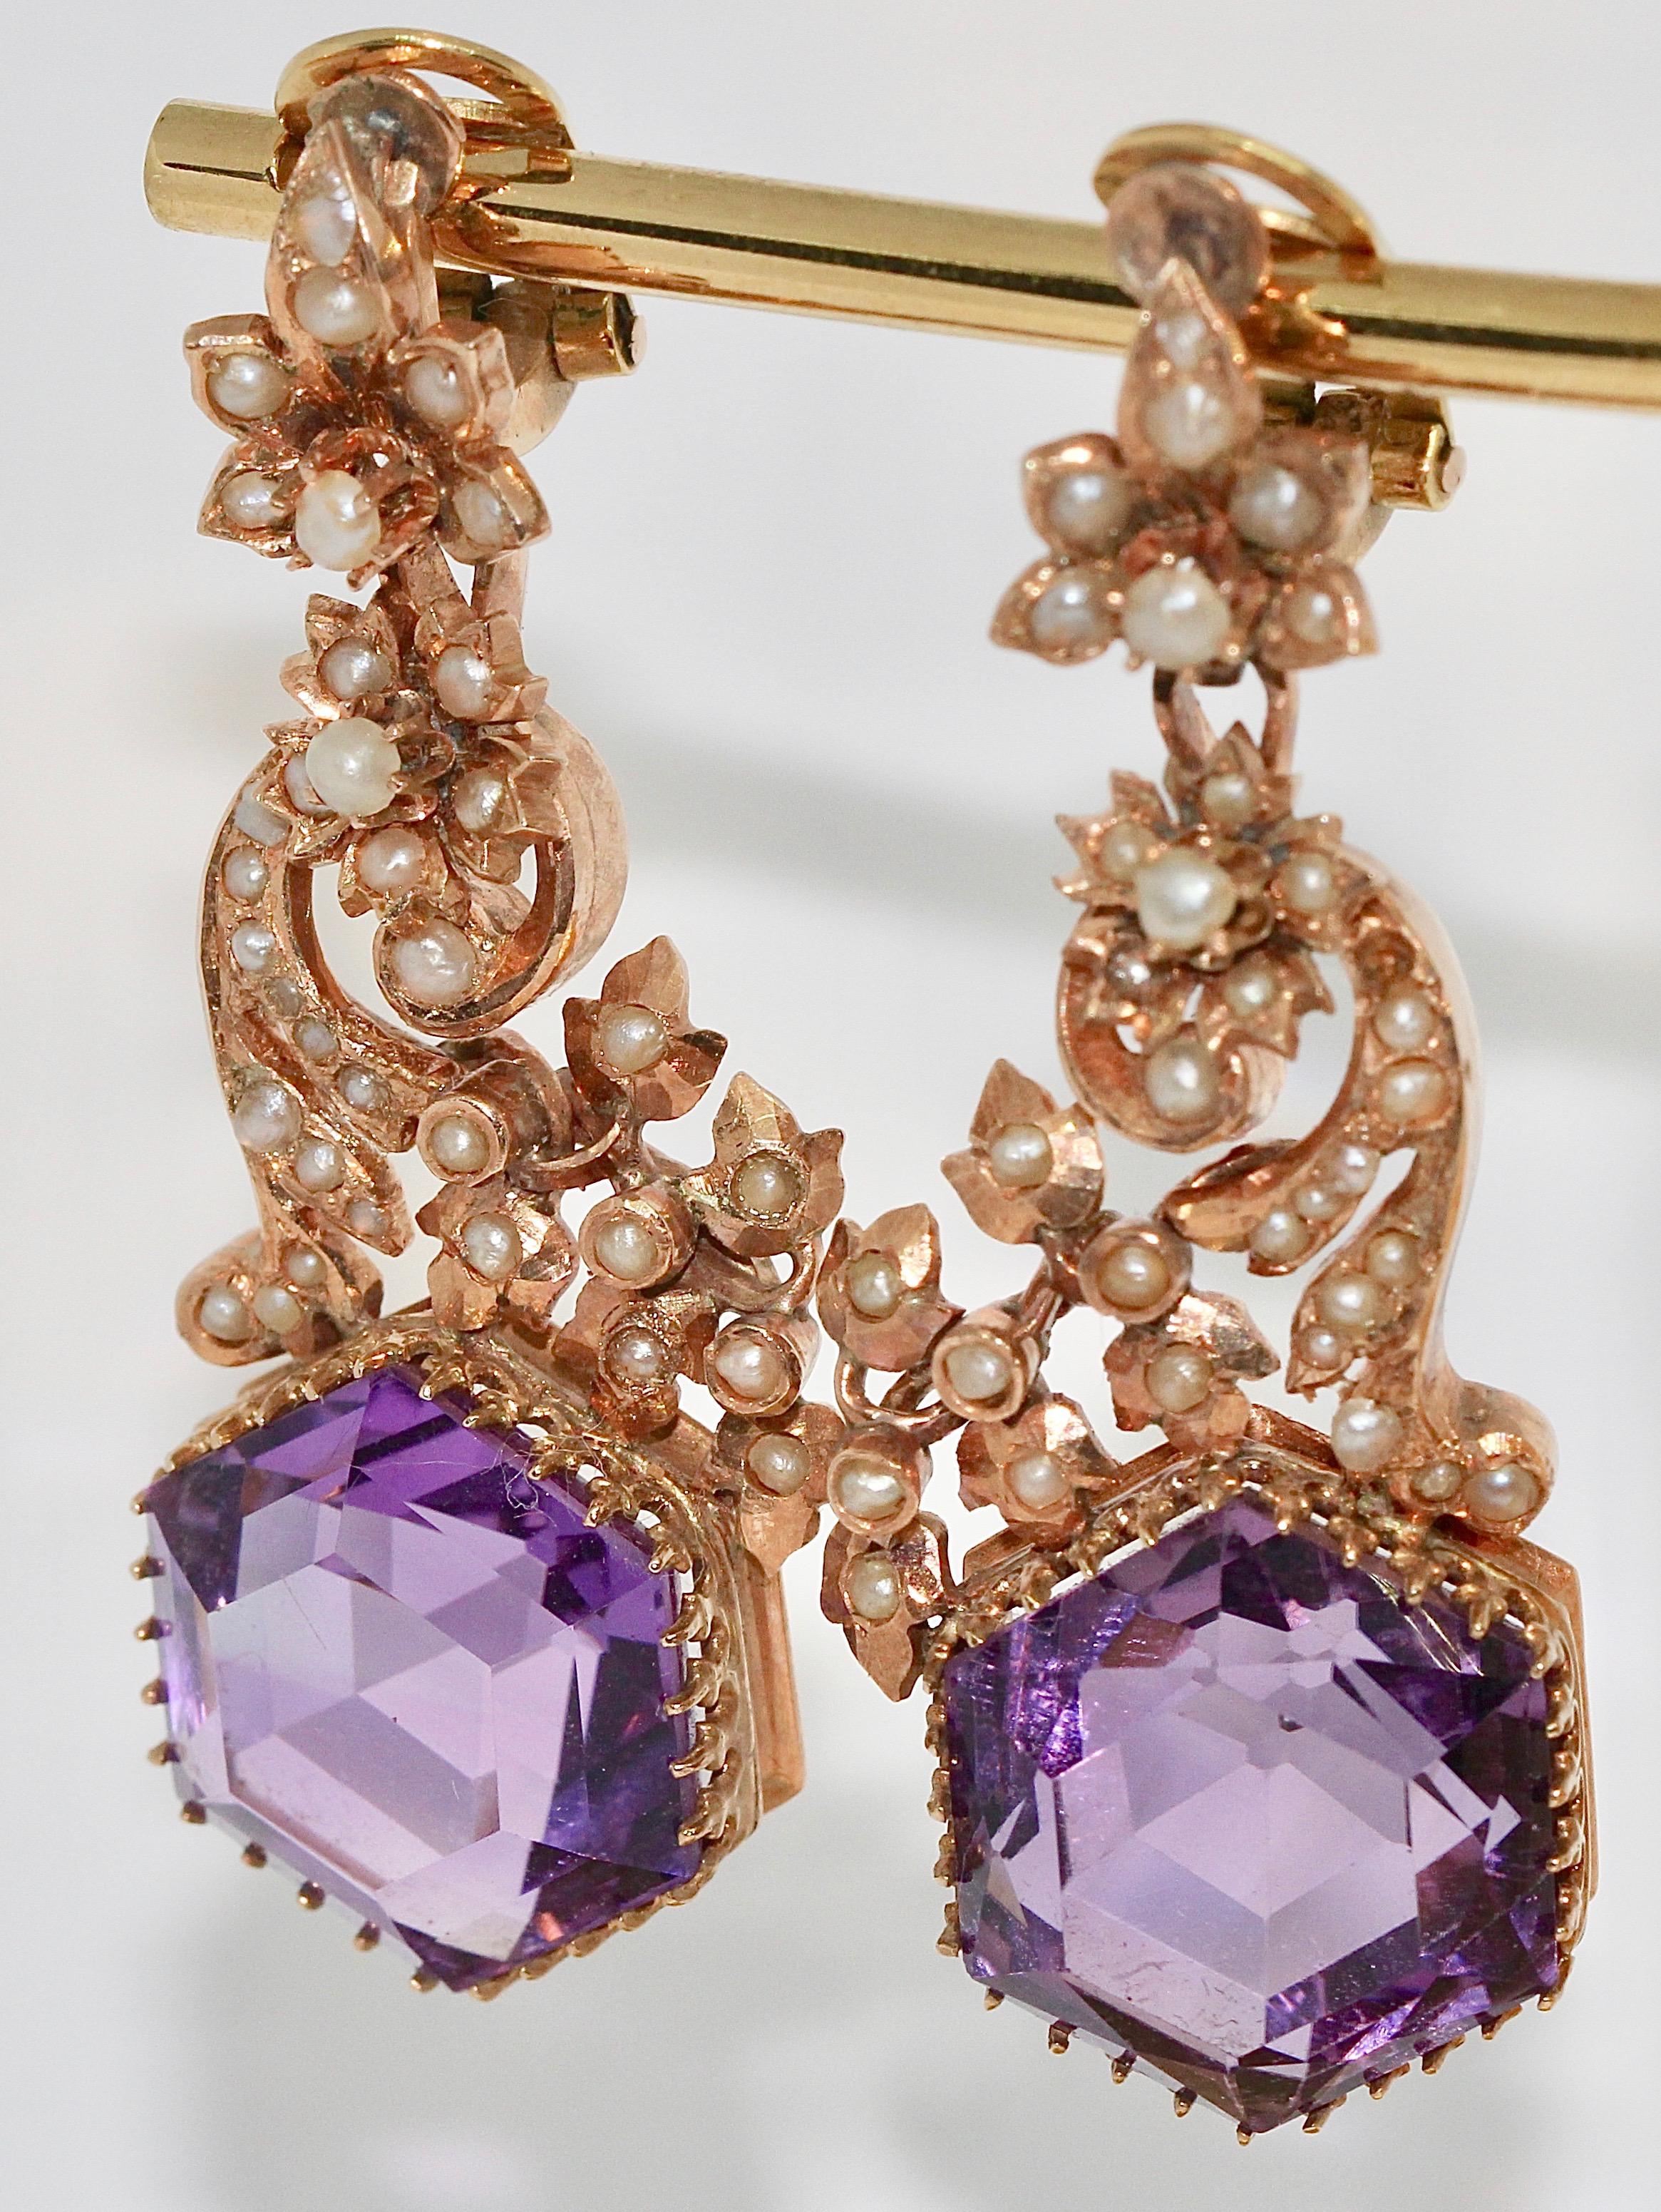 Antique Victorian Amethyst Earrings with natural Pearls. 14 Karat Rose Gold.

We also offer the suitable enhancer/ pendant. Take a look at our other offers.